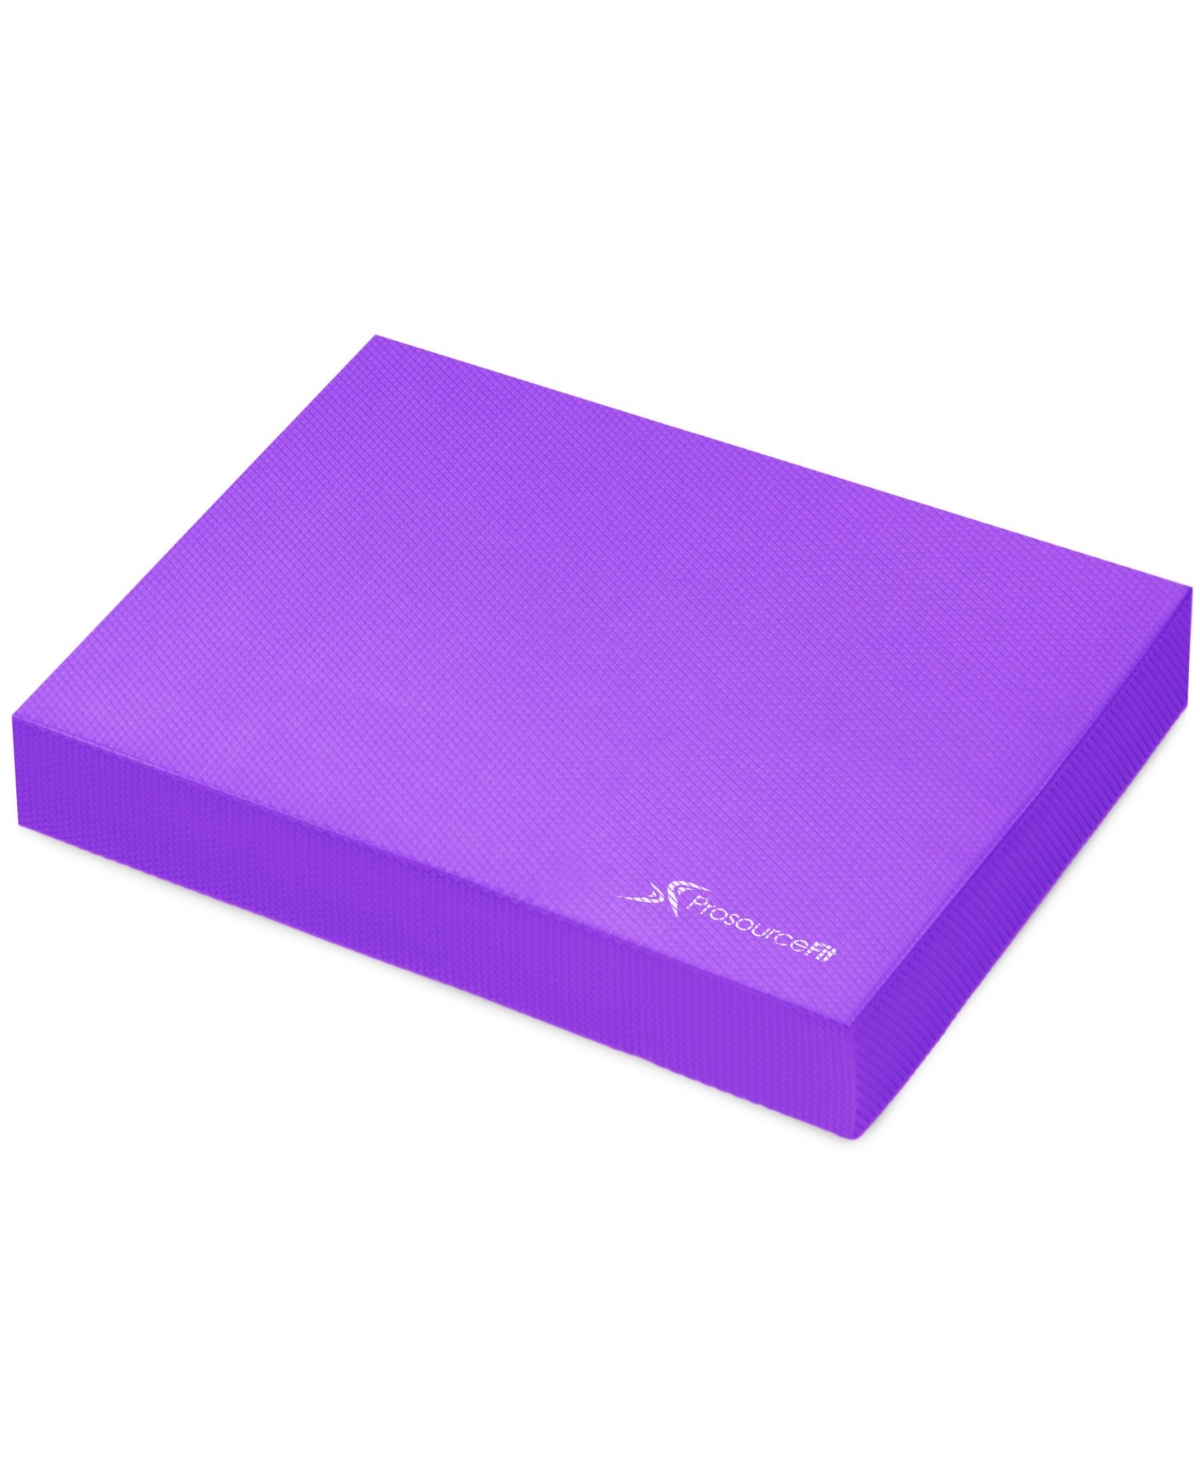 Exercise Balance Pad 15.5x12.75-in - Purple